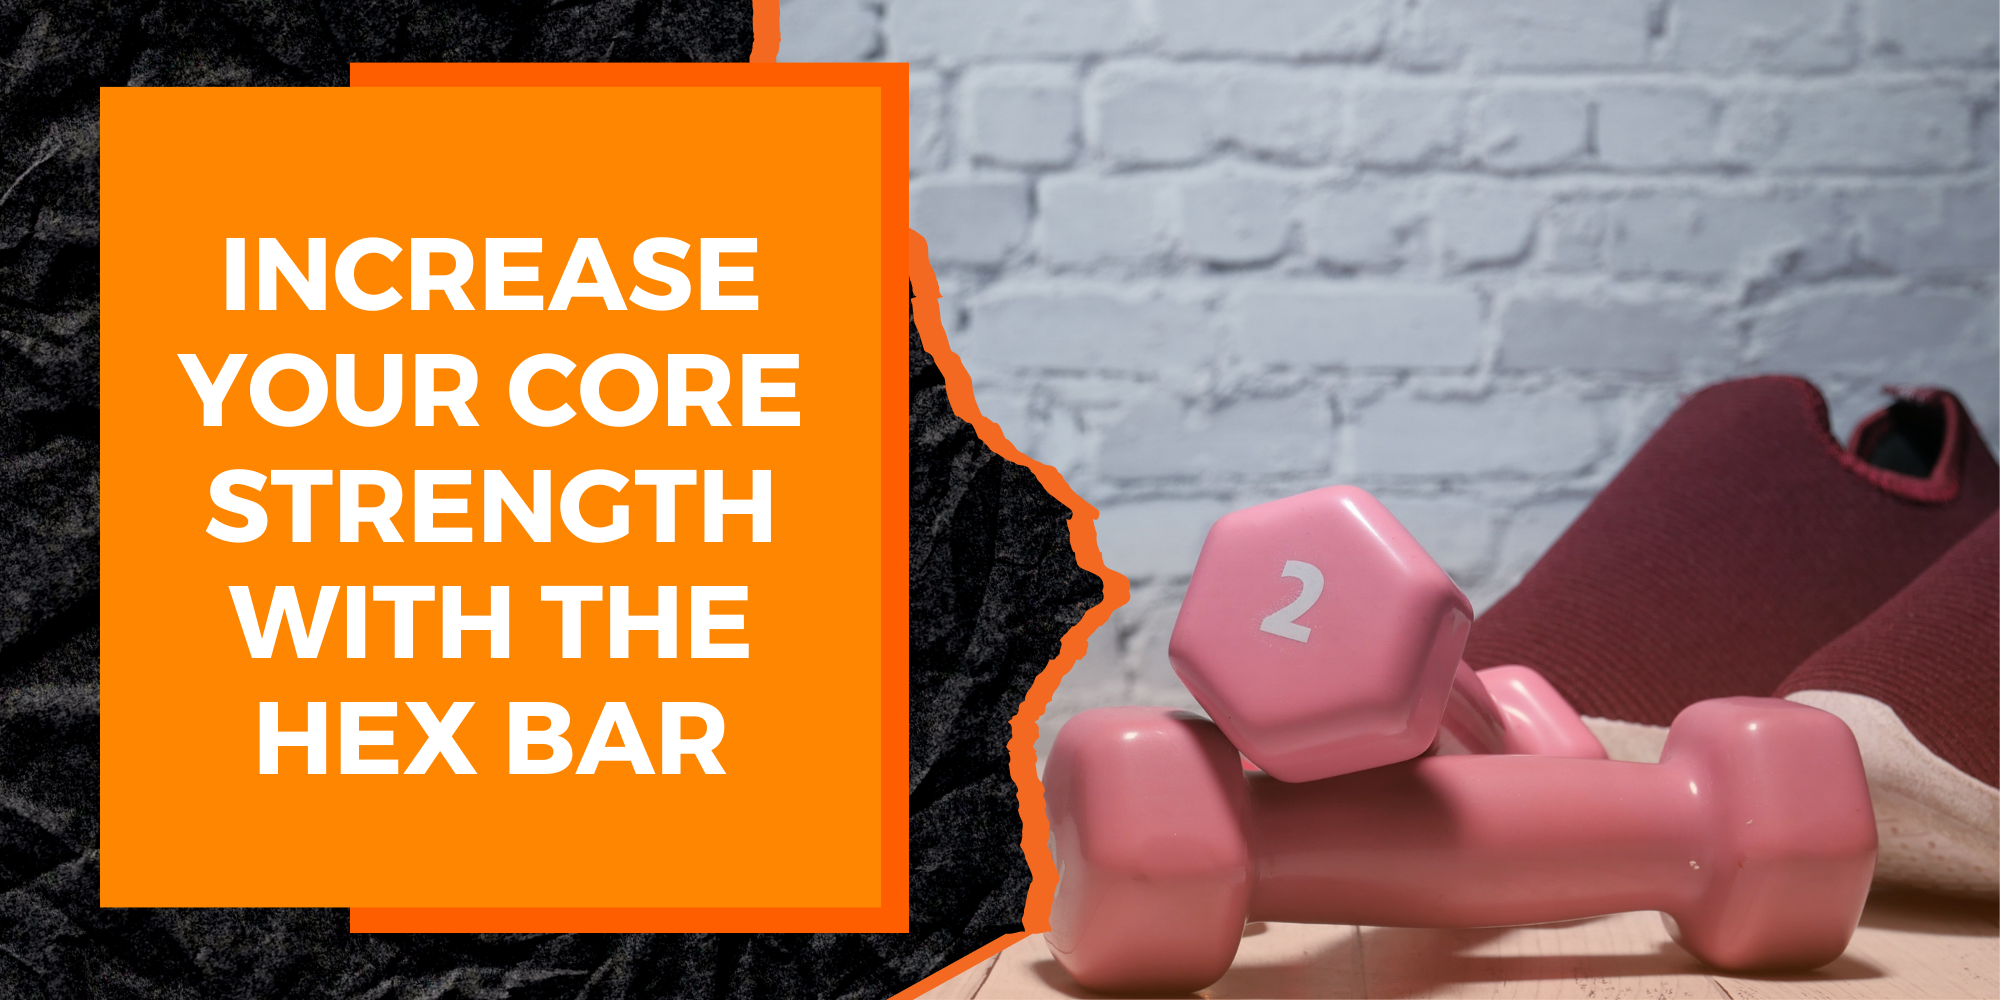 Increase Your Core Strength With the Hex Bar